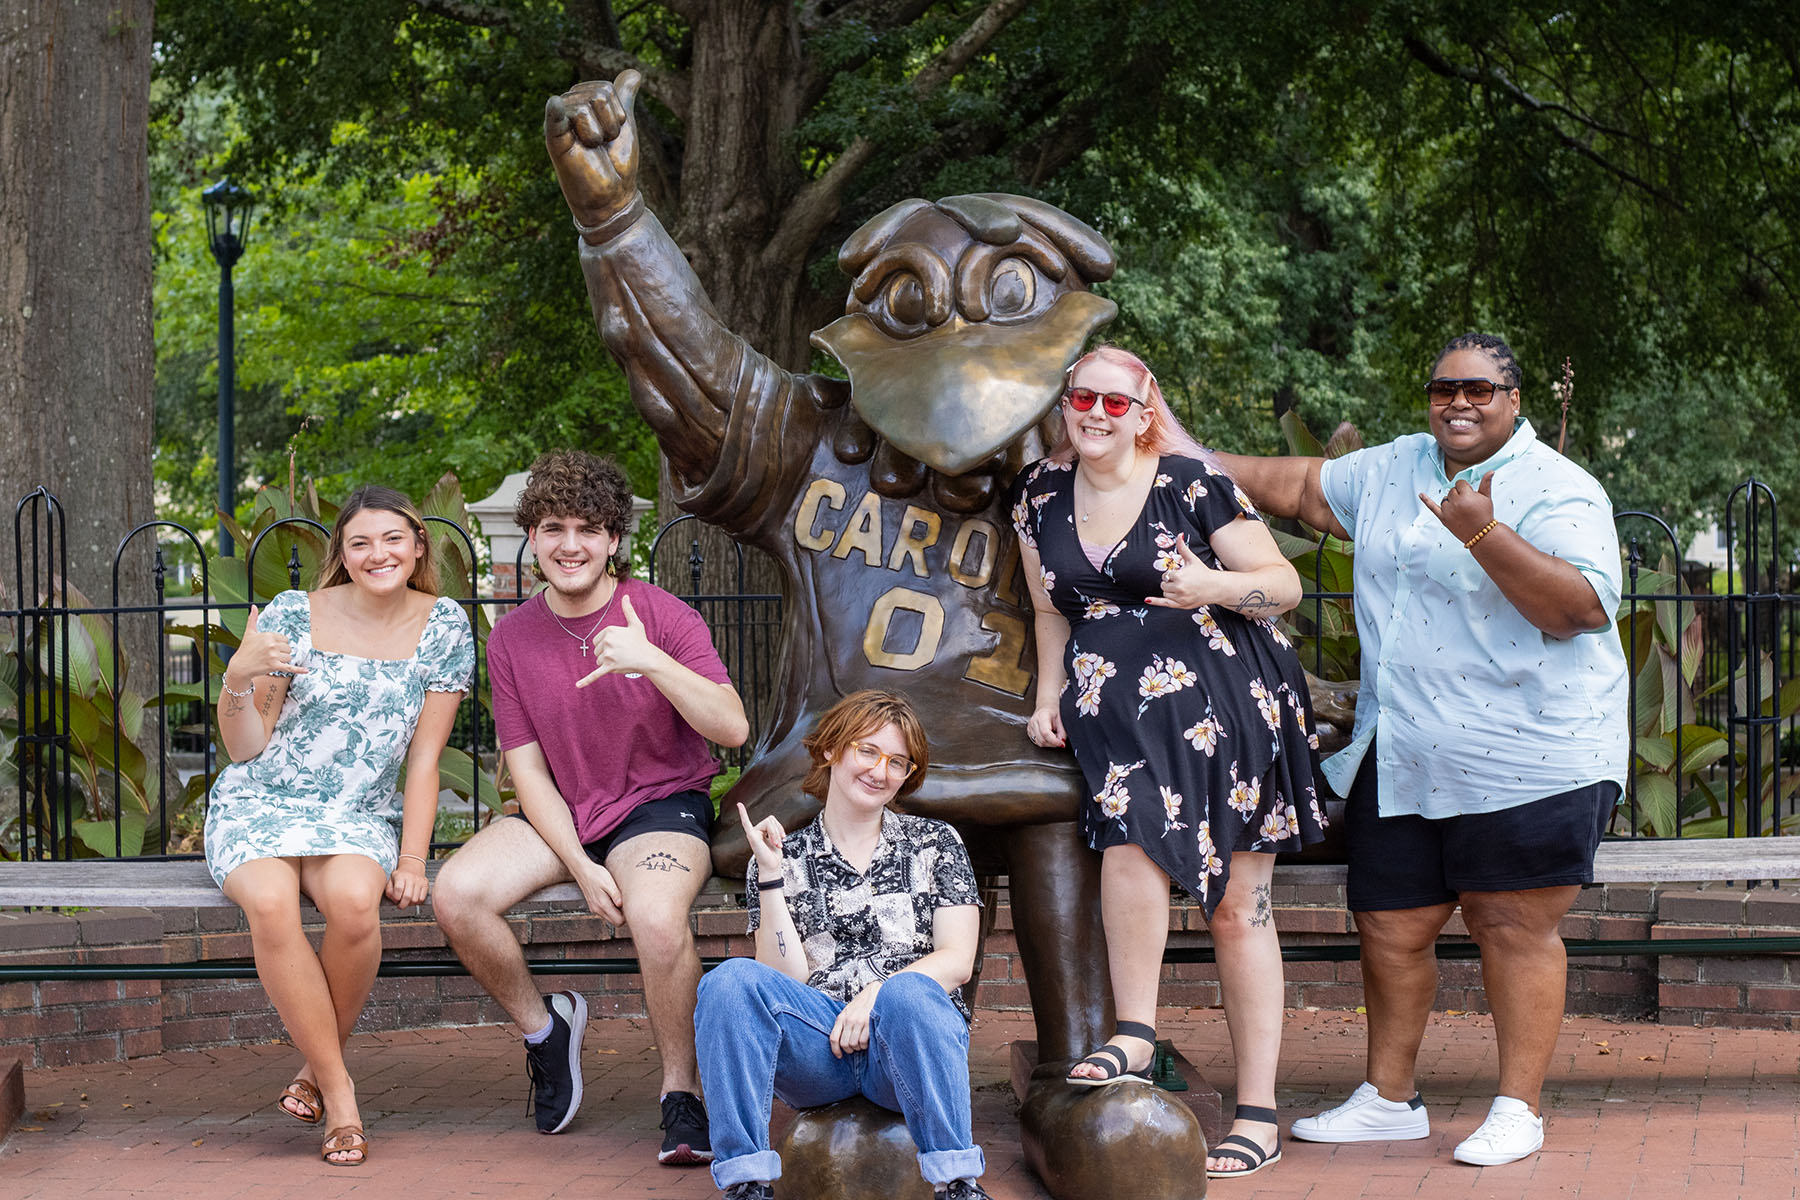 A group of students with diverse disabilities have "spurs up" with the bronze cocky statue.